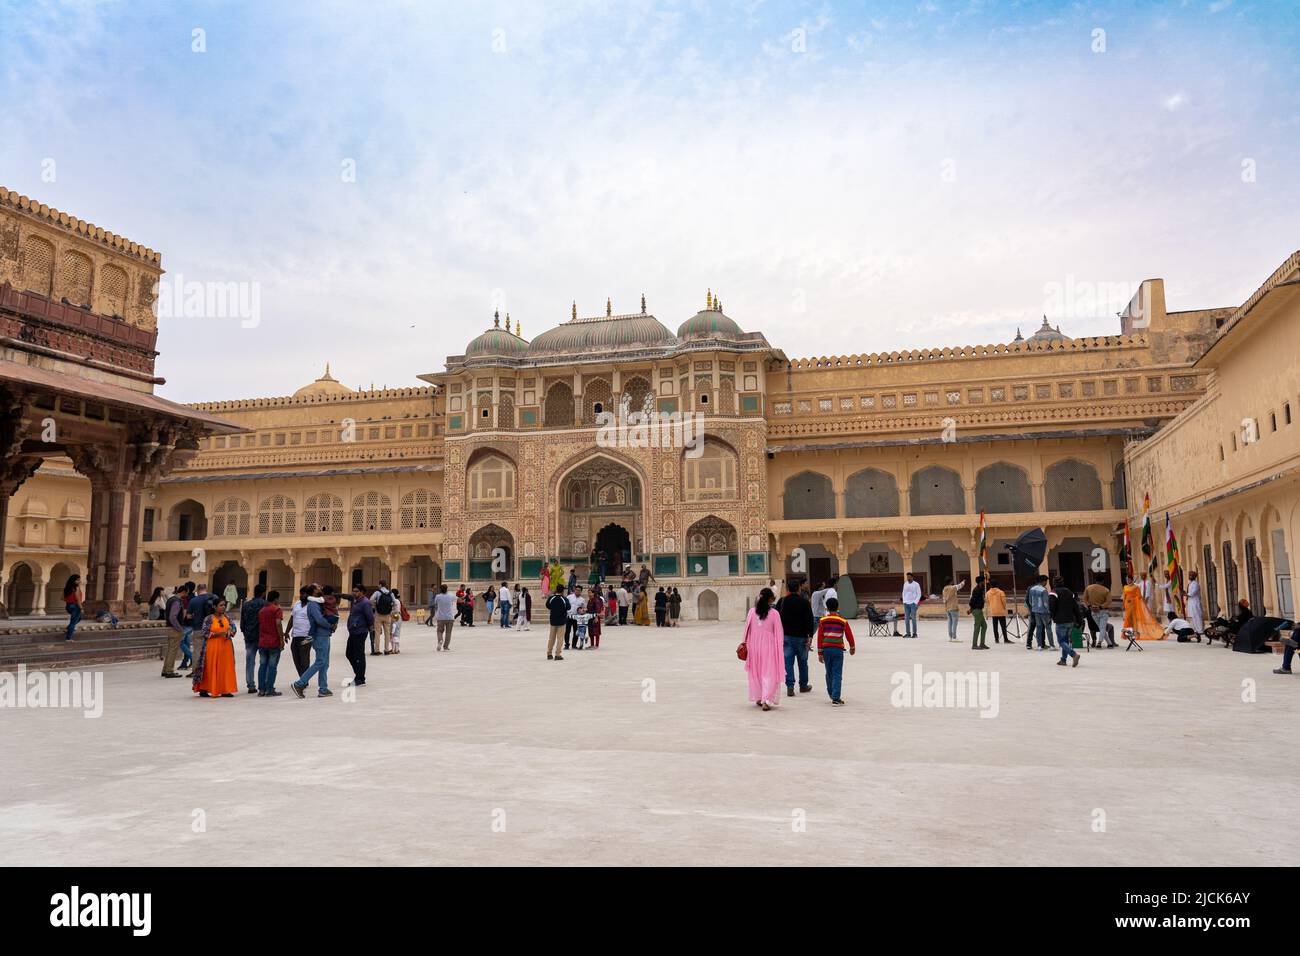 Amber Fort in Jaipur, India Stock Photo